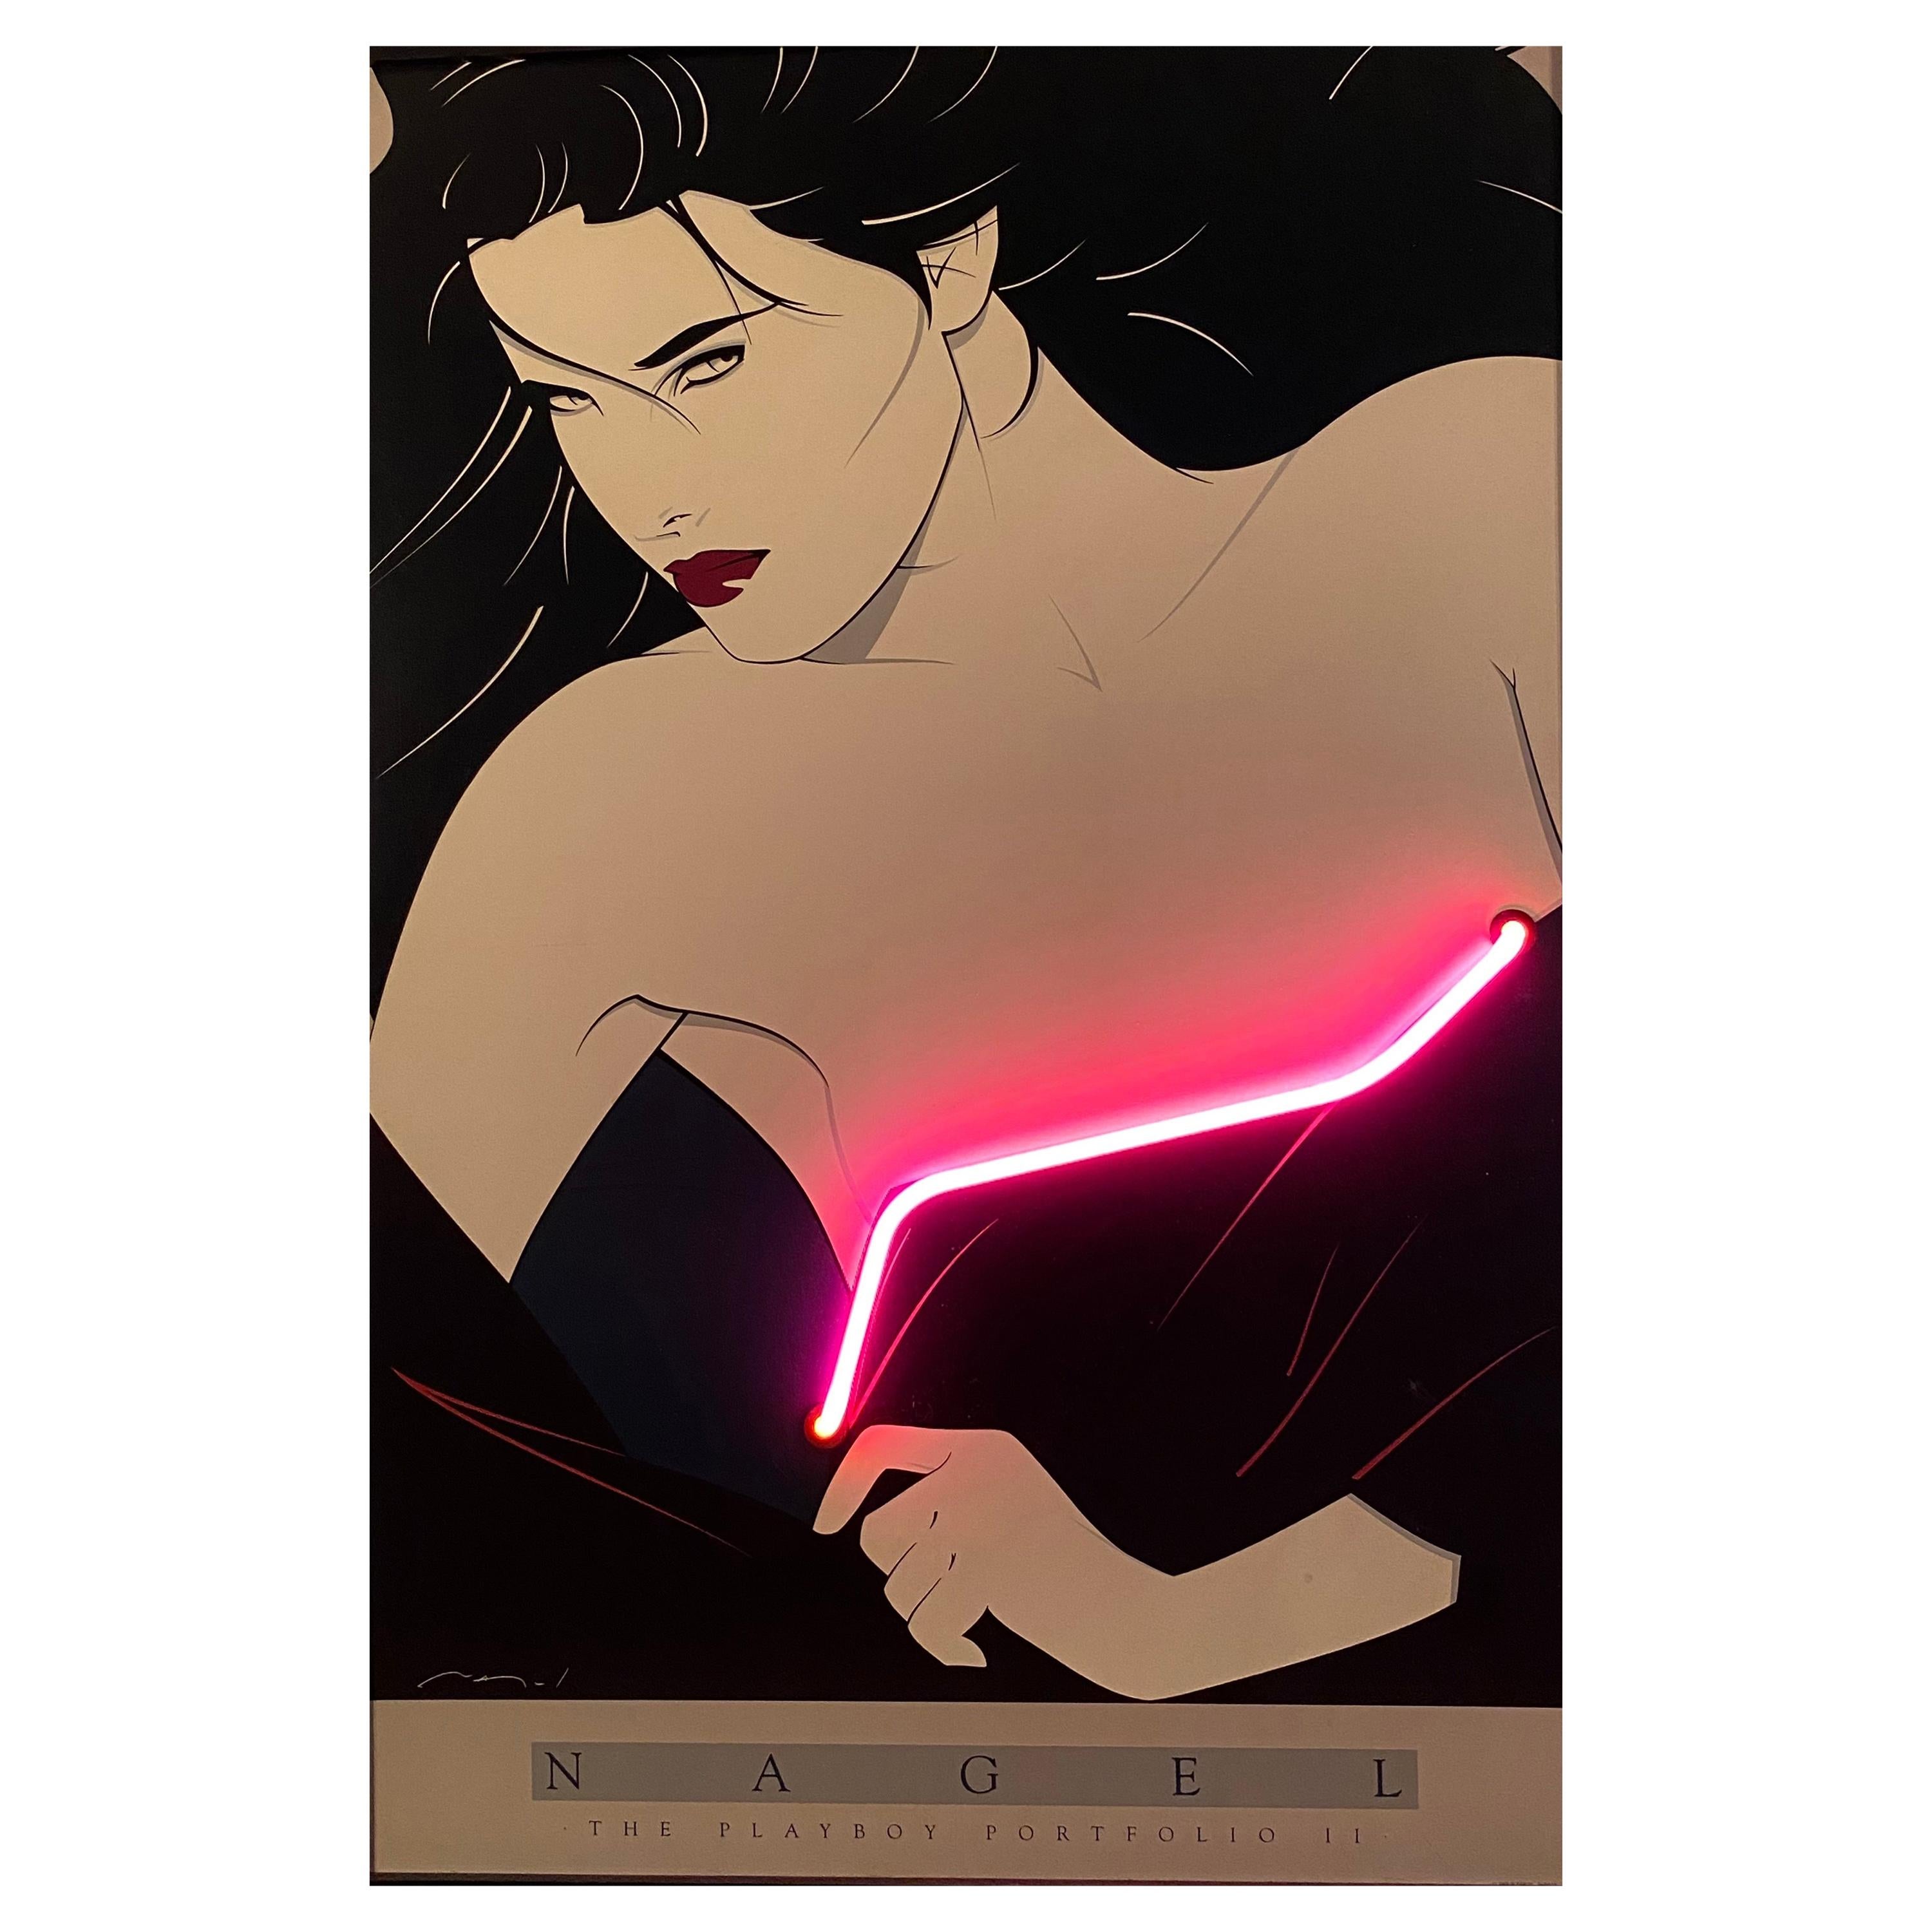 Patrick Nagel Print with Pink Neon Accent, 1980s